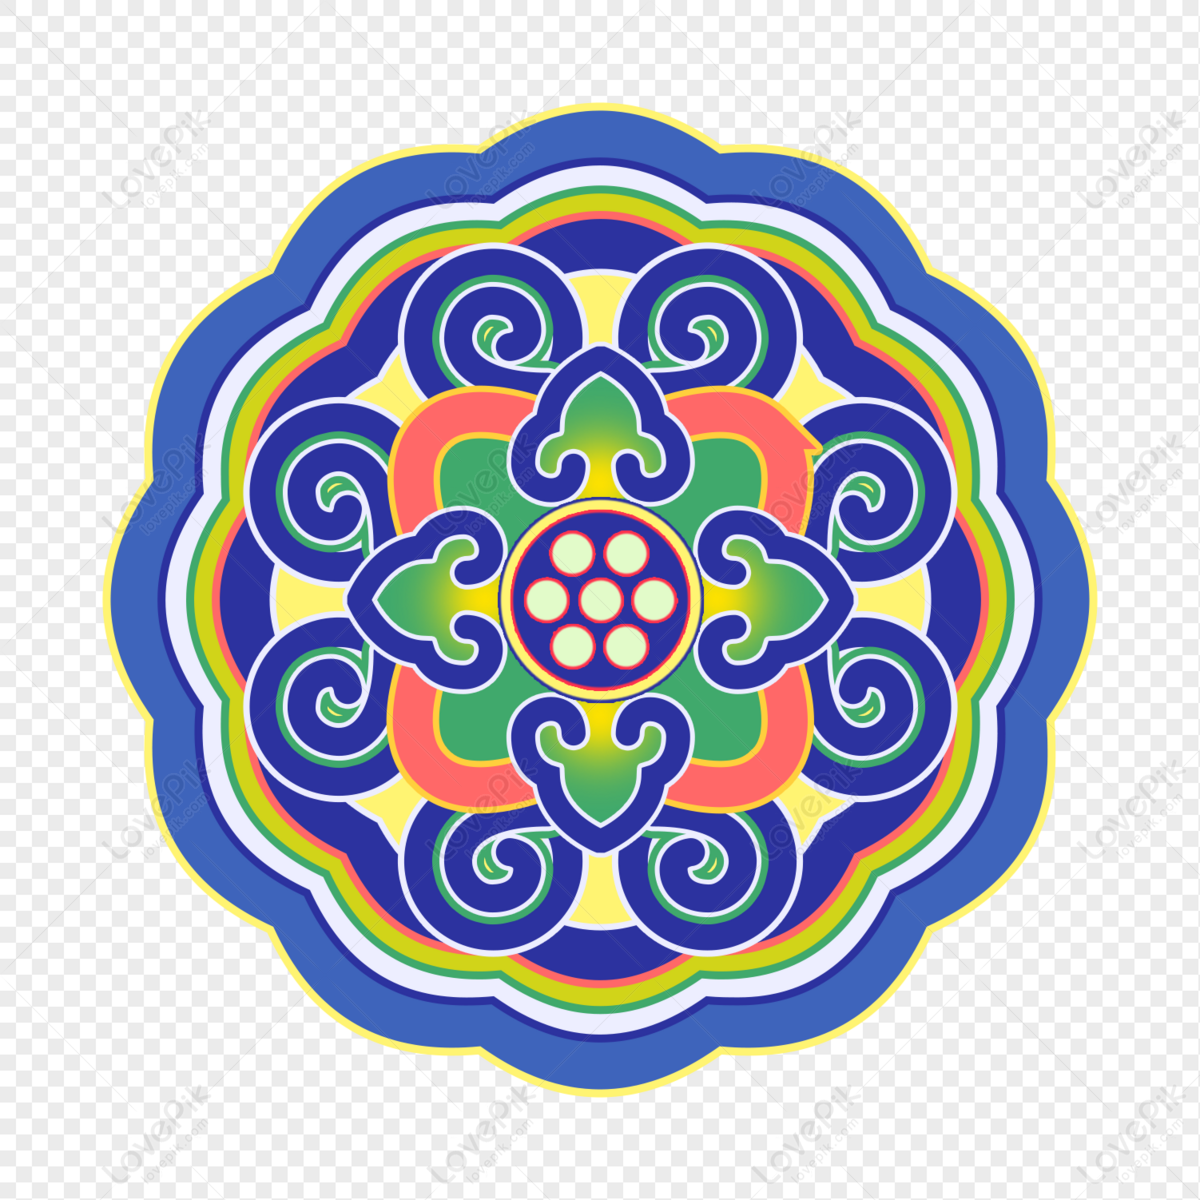 Chinese Architectural Pattern PNG Picture And Clipart Image For ...